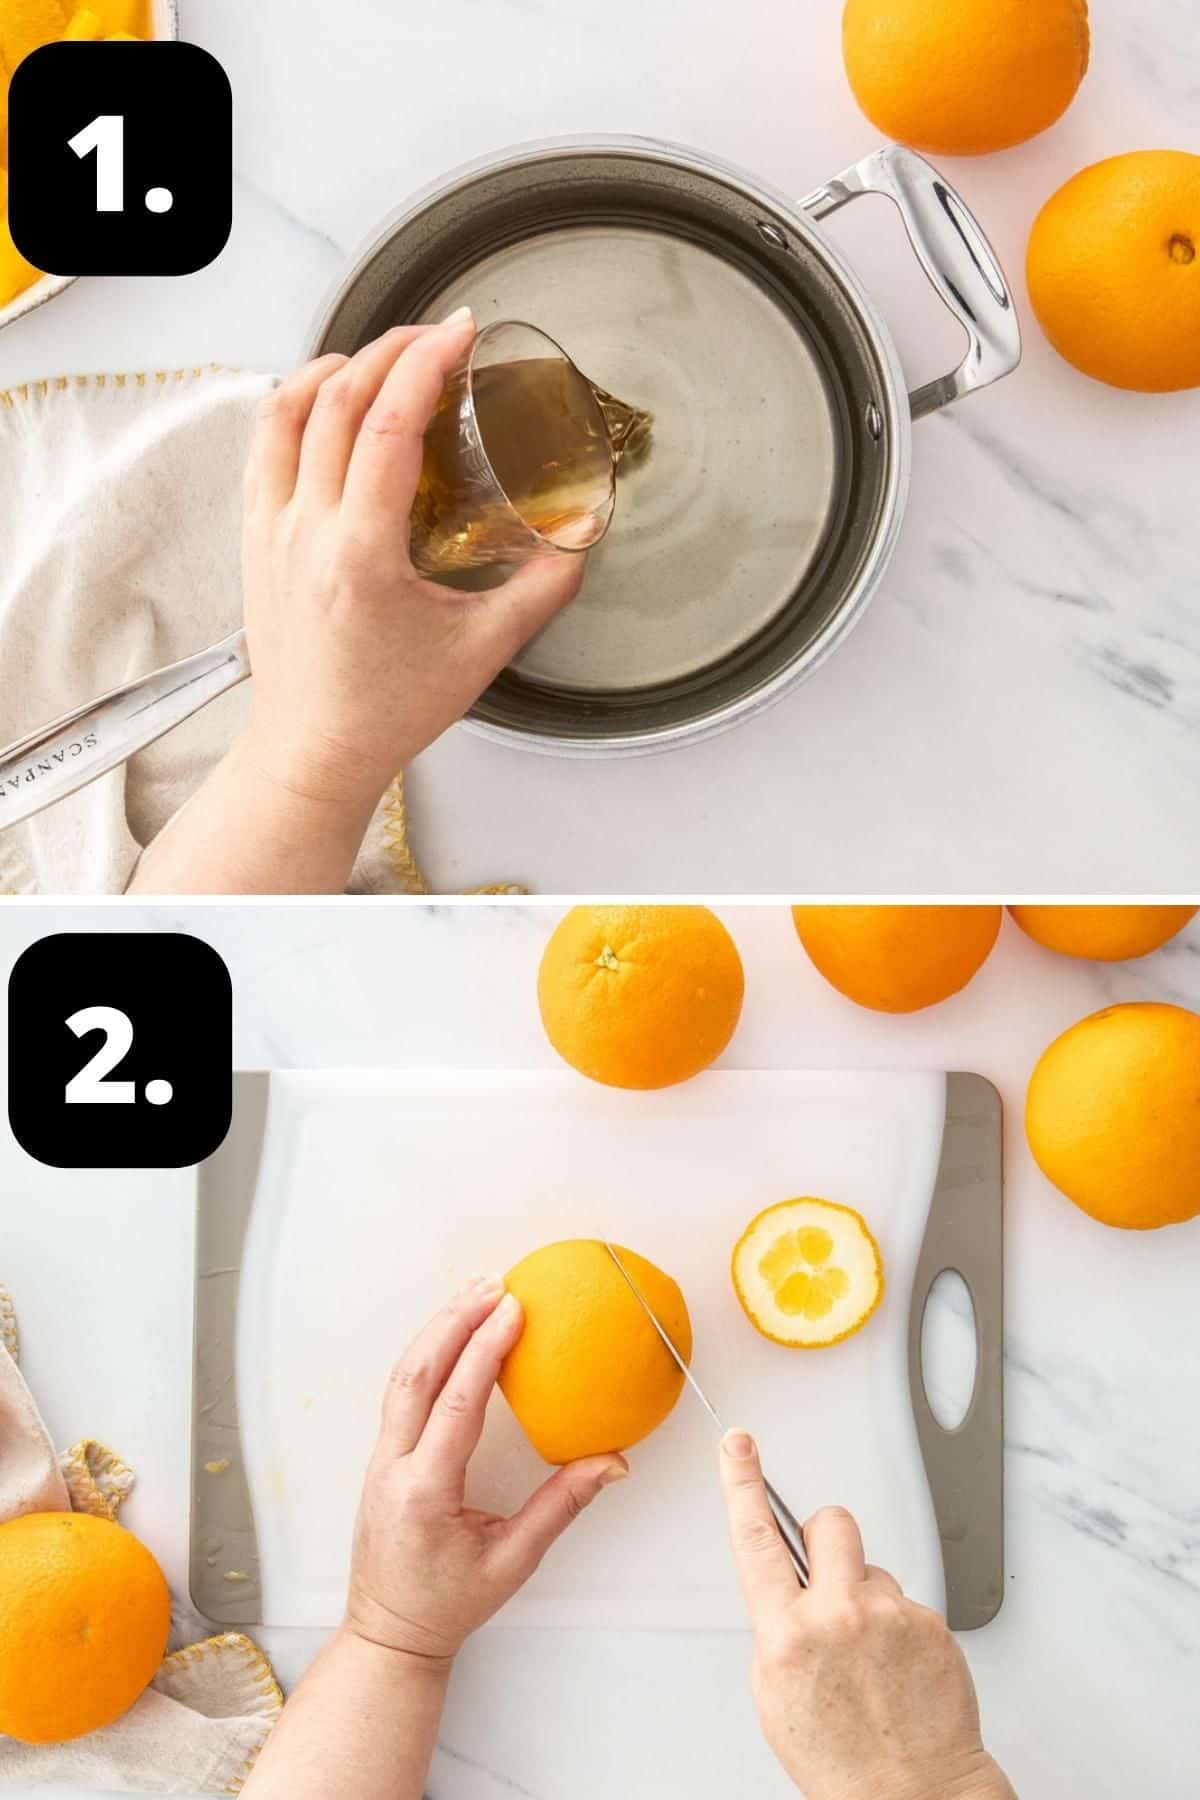 Steps 1-2 of preparing this recipe - making the syrup and slicing the bottom off the orange.